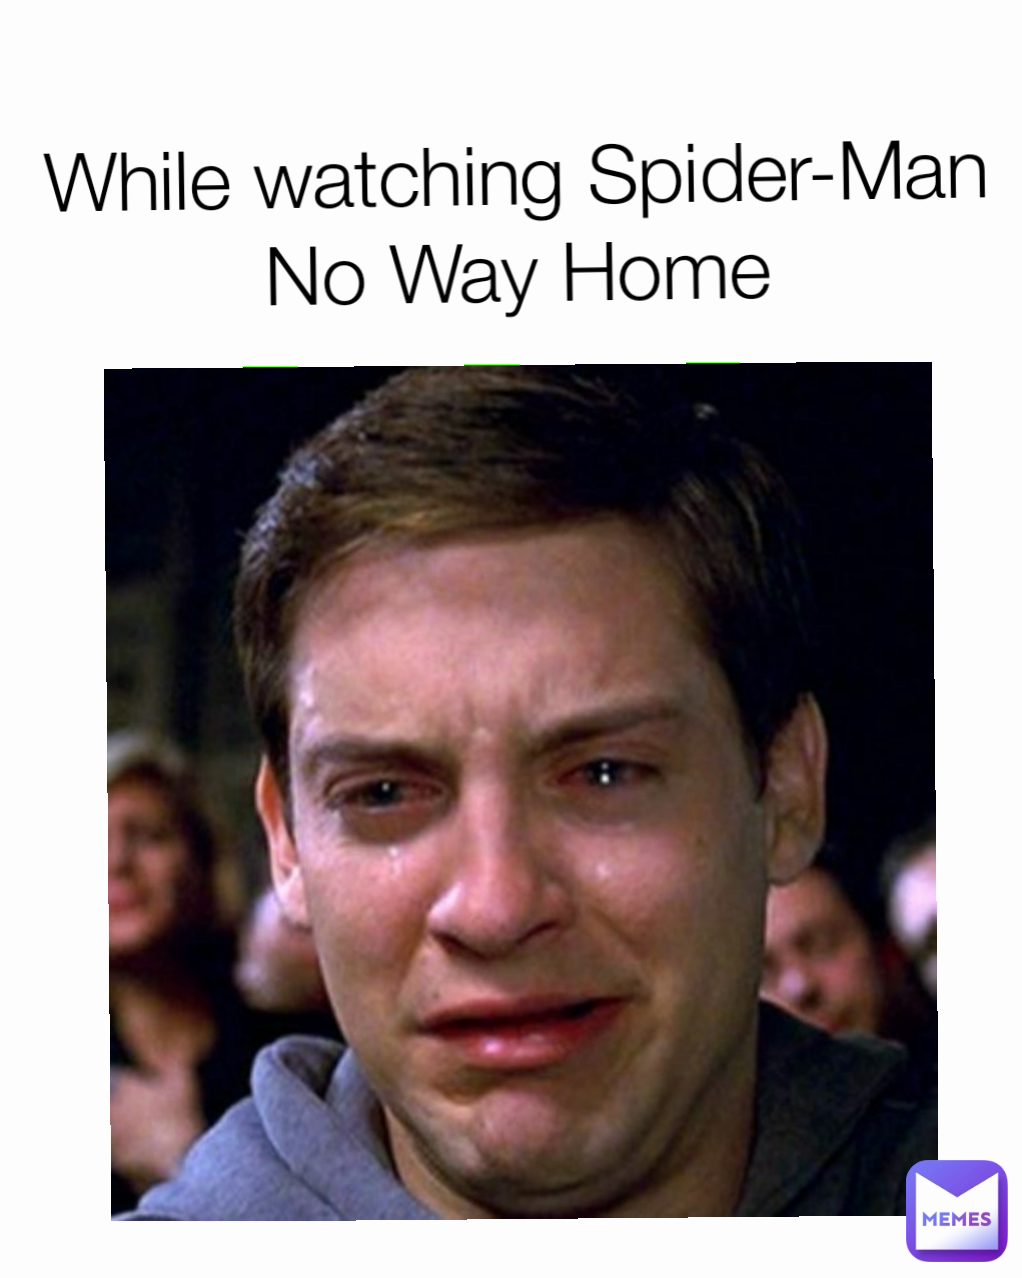 While watching Spider-Man No Way Home